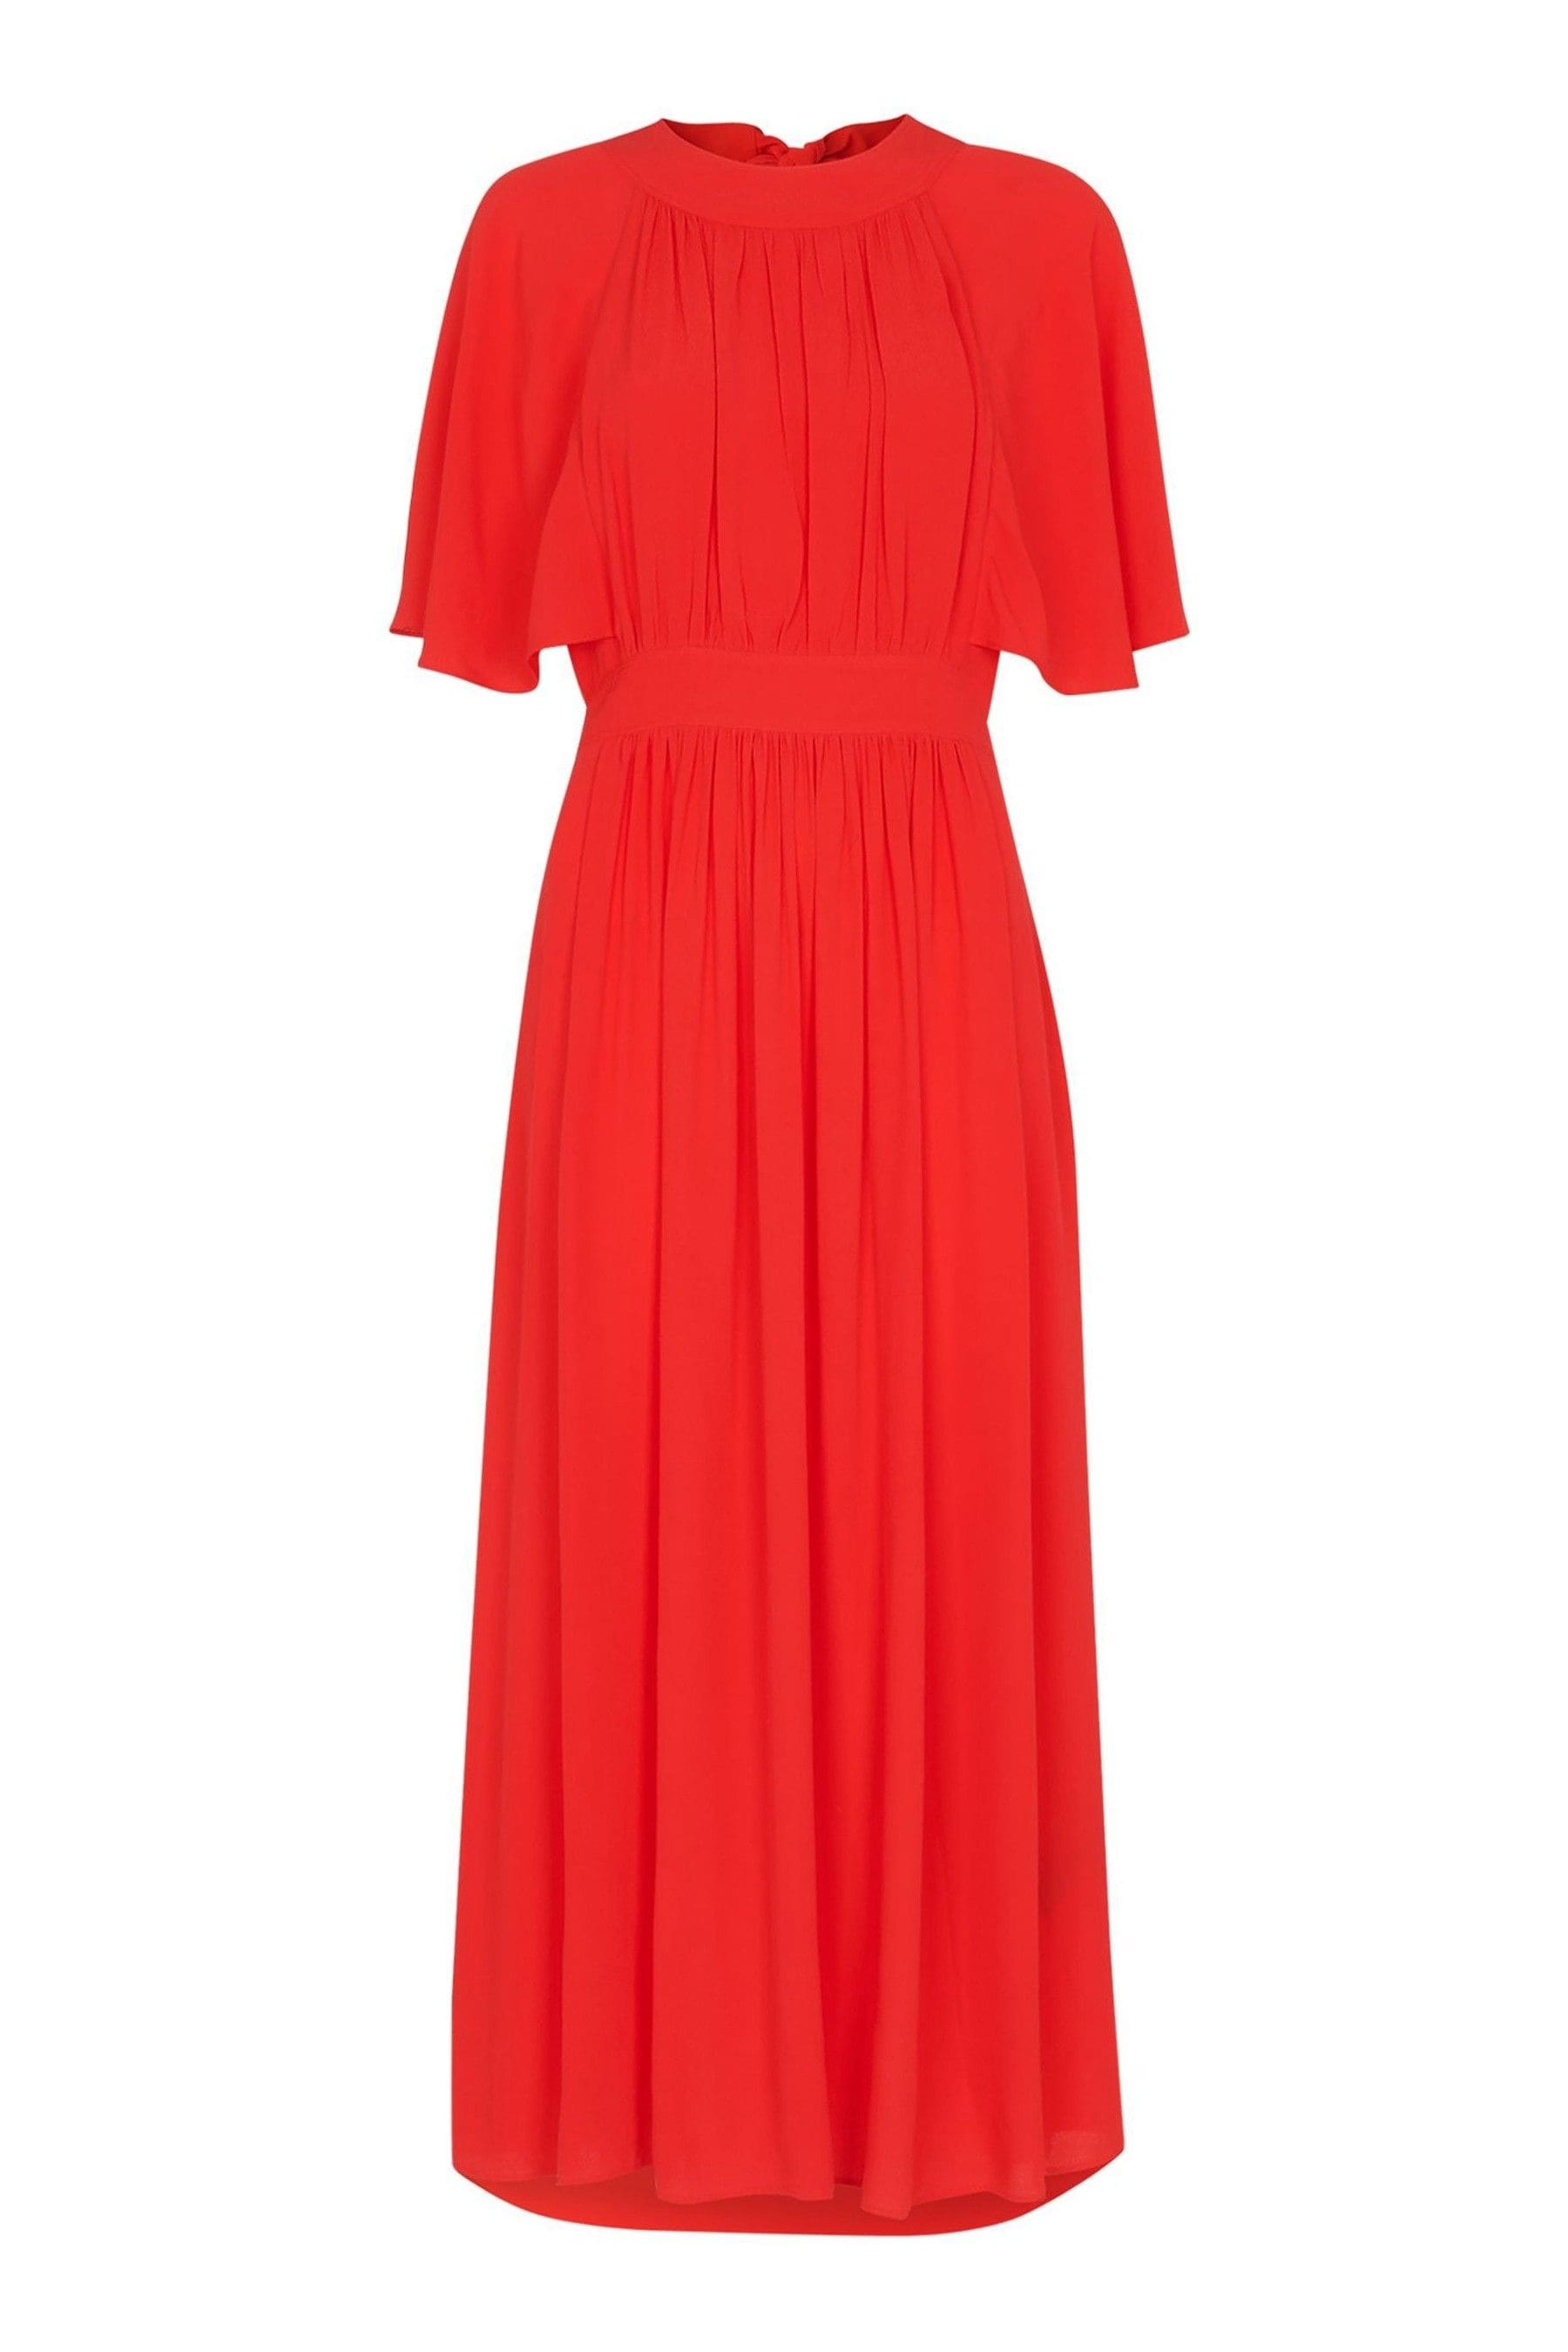 Buy Whistle Red Amelia Cape Sleeve Dress from Next Ireland